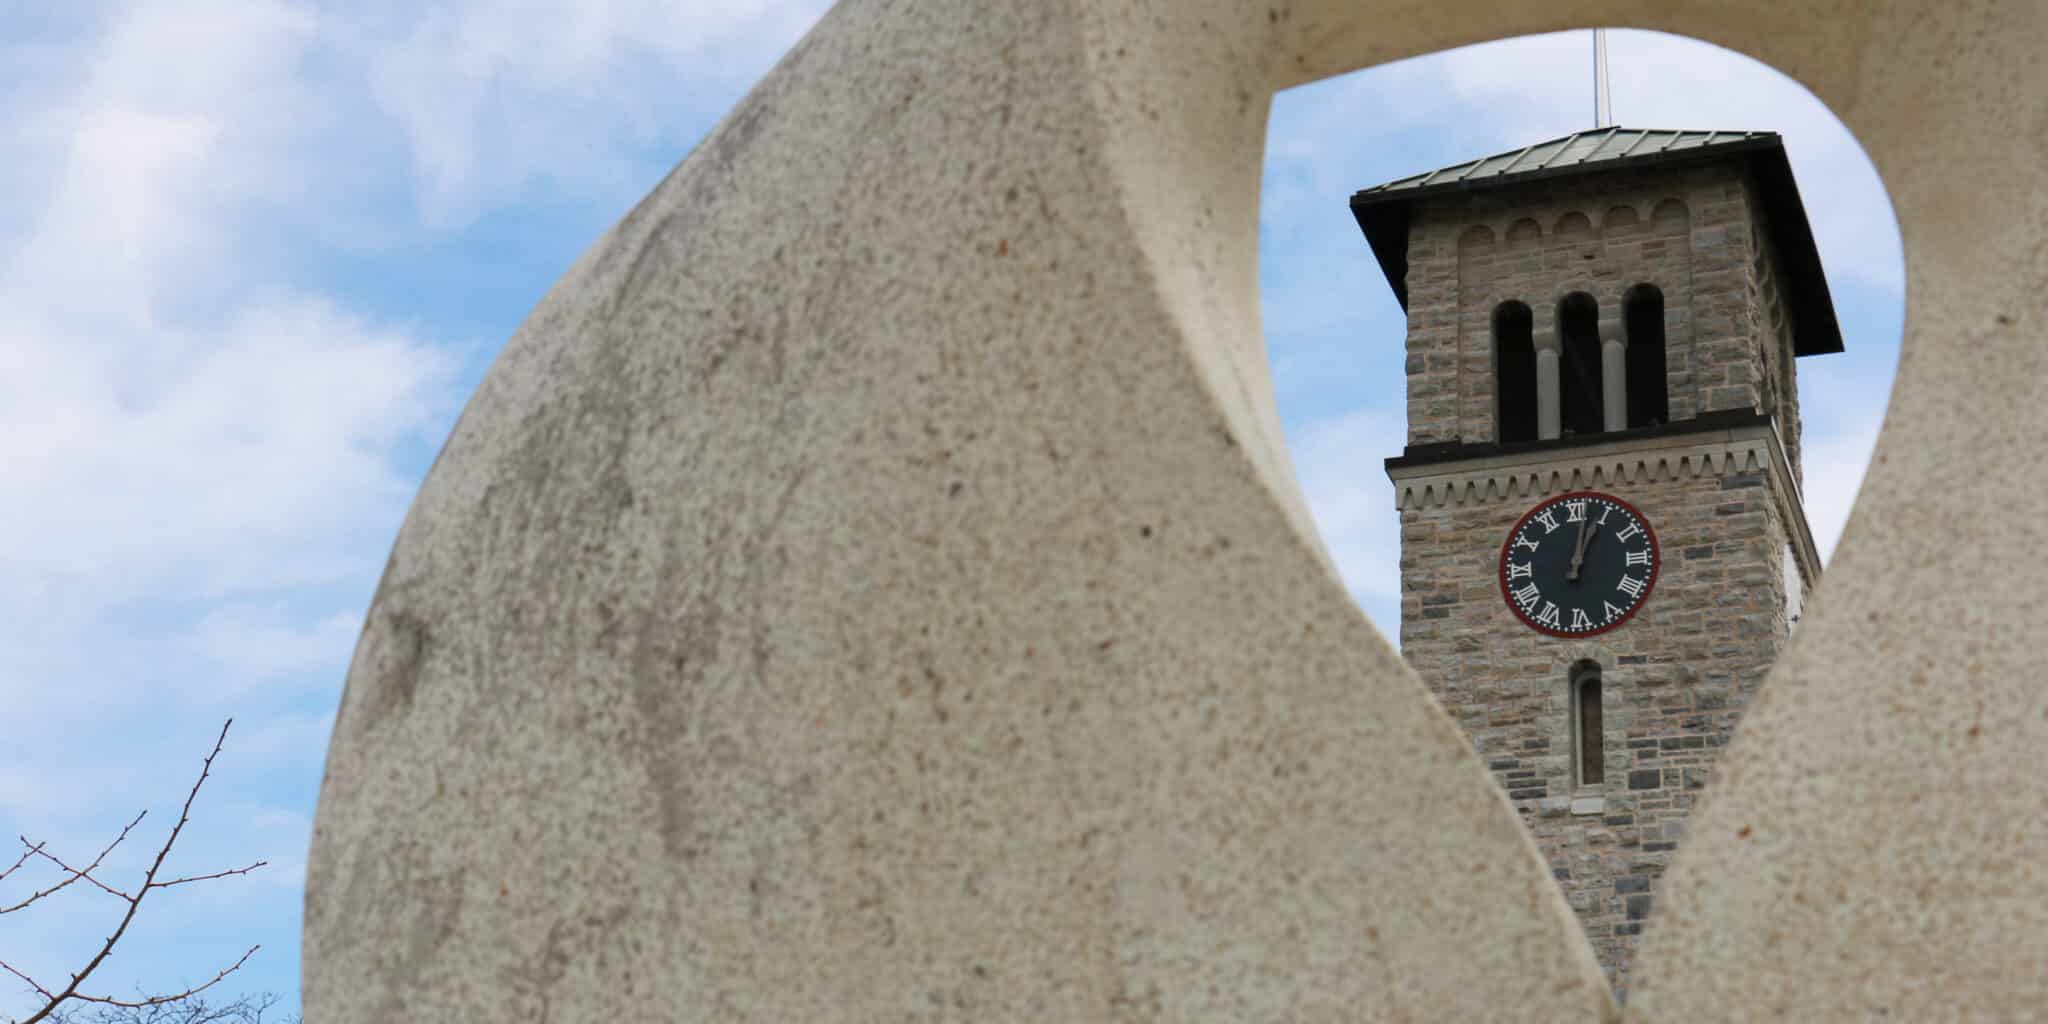 Image of a clocktower framed and shot through the opening of a stone sculpture.